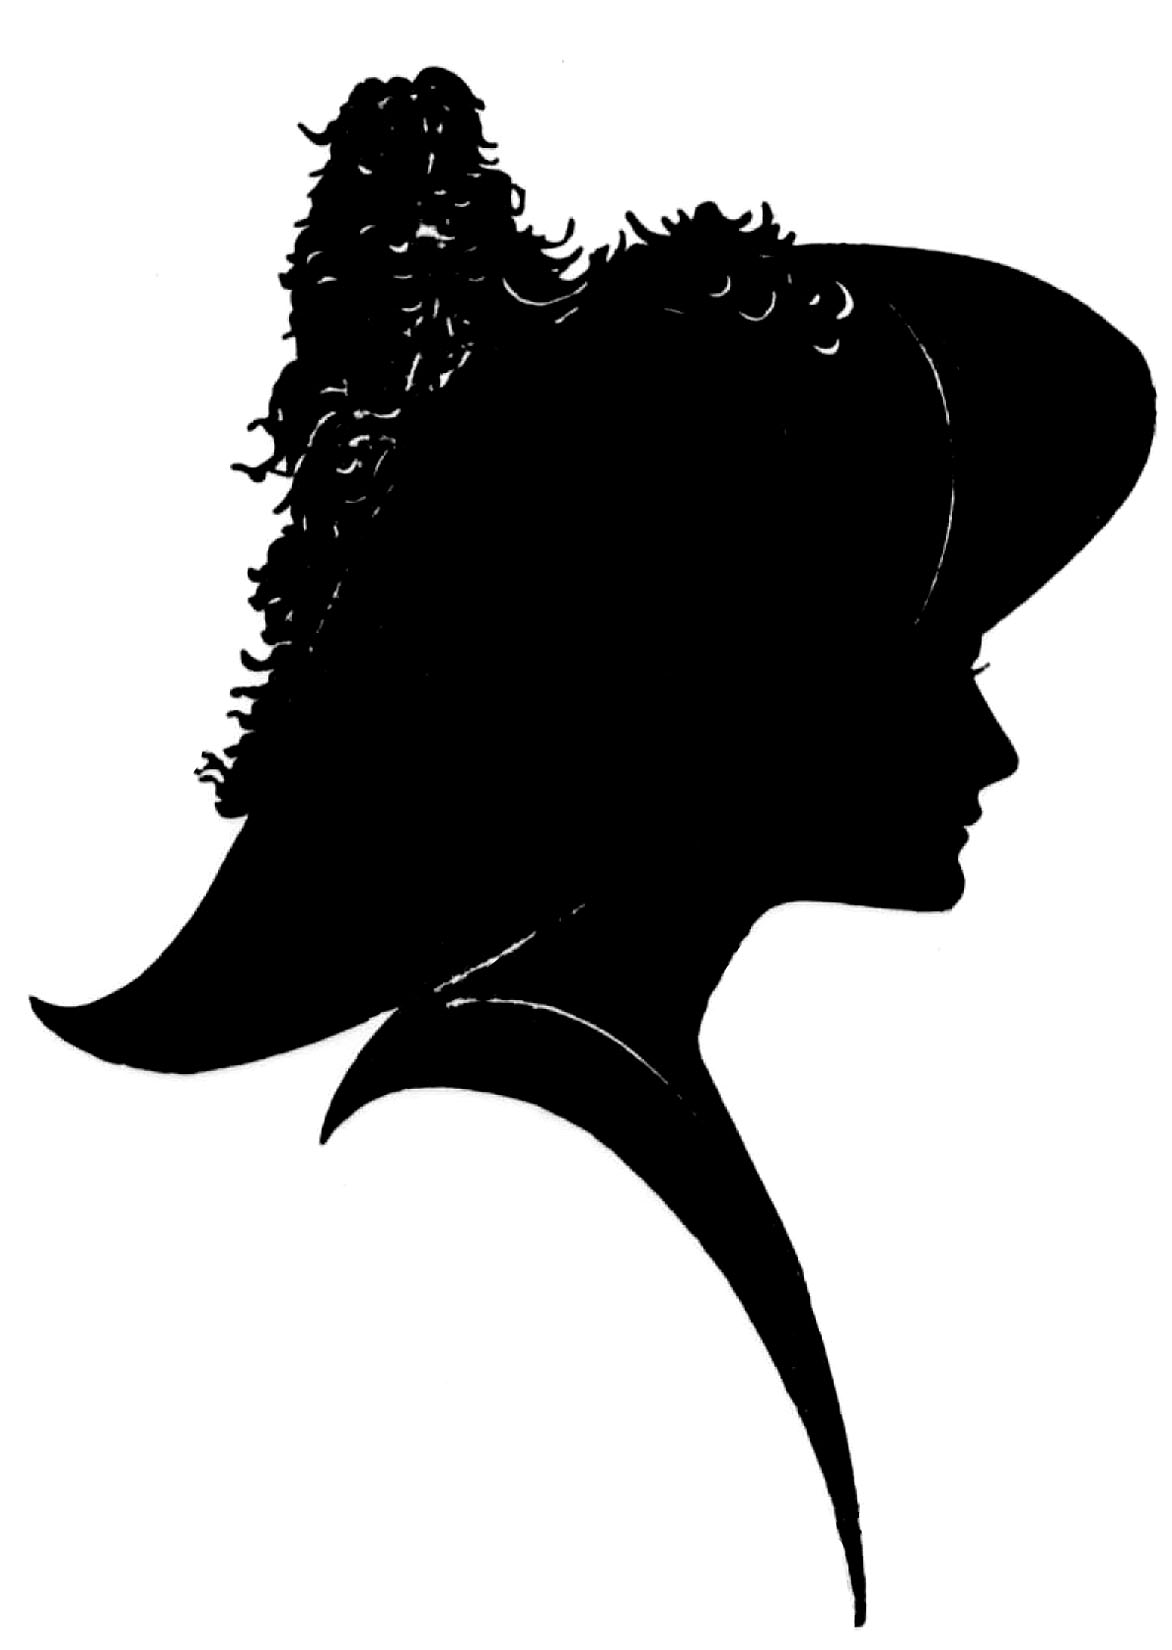 Here we have a beautiful Vintage Elegant Lady with Feathered Hat Silhouette Image! 